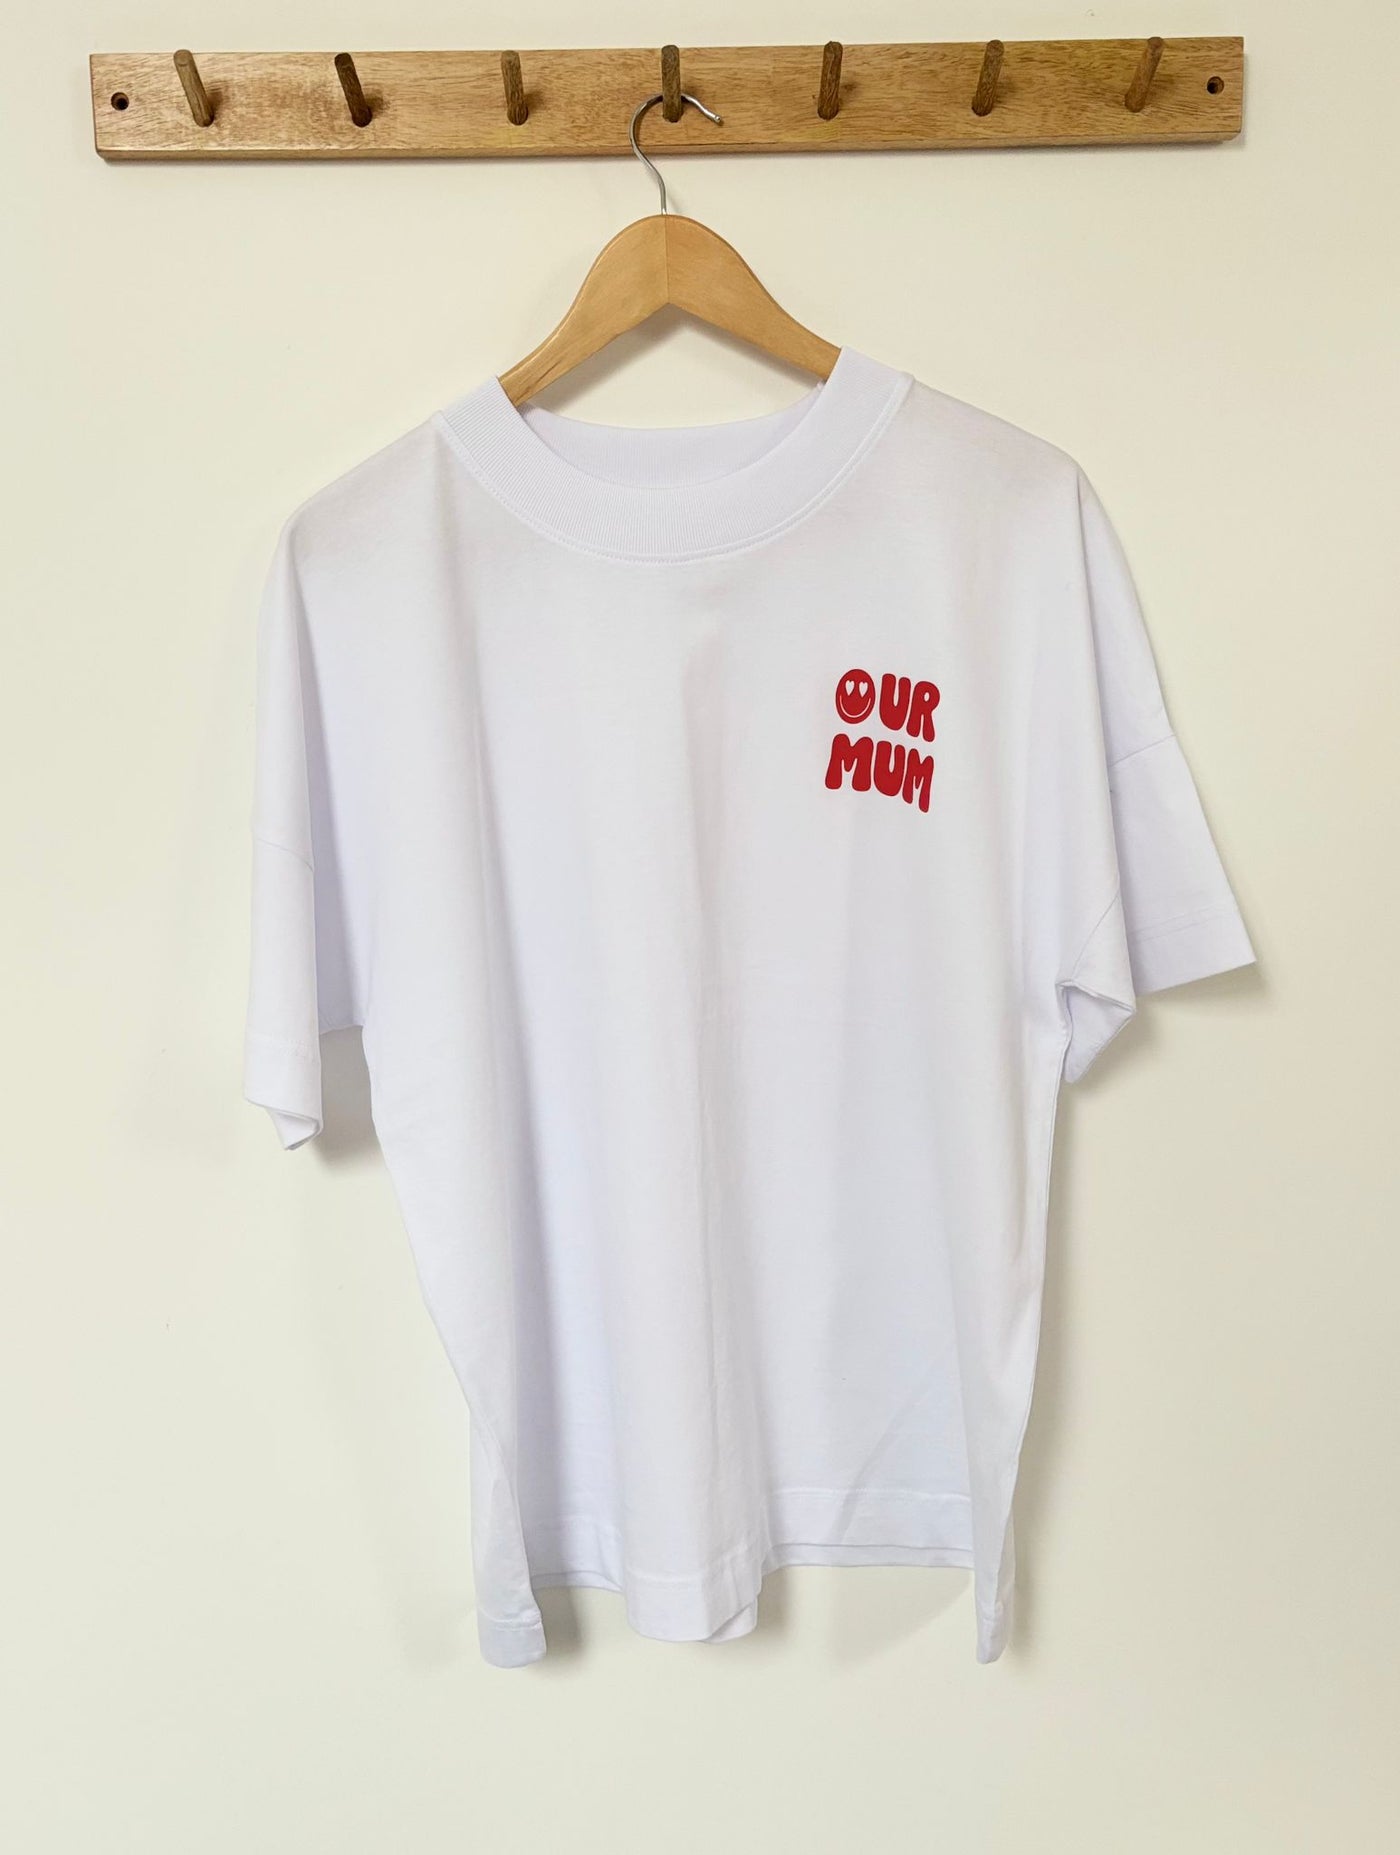 Our Albie ‘Our Mum’ oversized white tee for adults